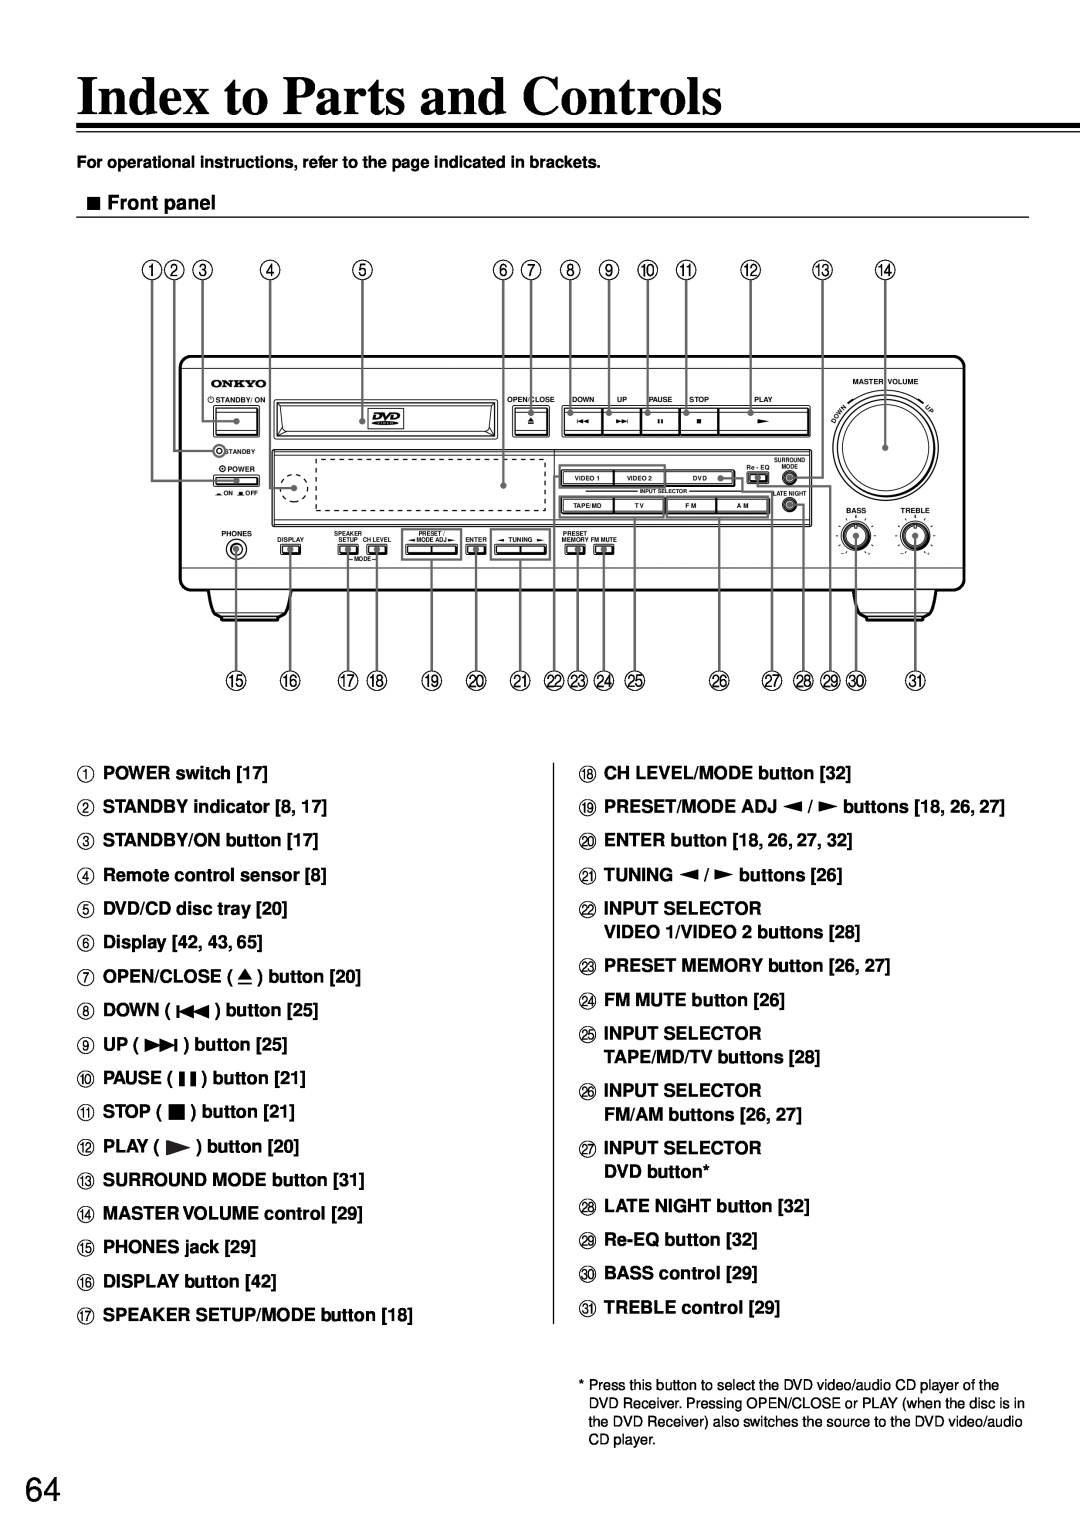 Onkyo DR-90 instruction manual Index to Parts and Controls, 6 7 8 9 0 A B C D, Front panel, E F G H I J K Lmn O P Q R St U 